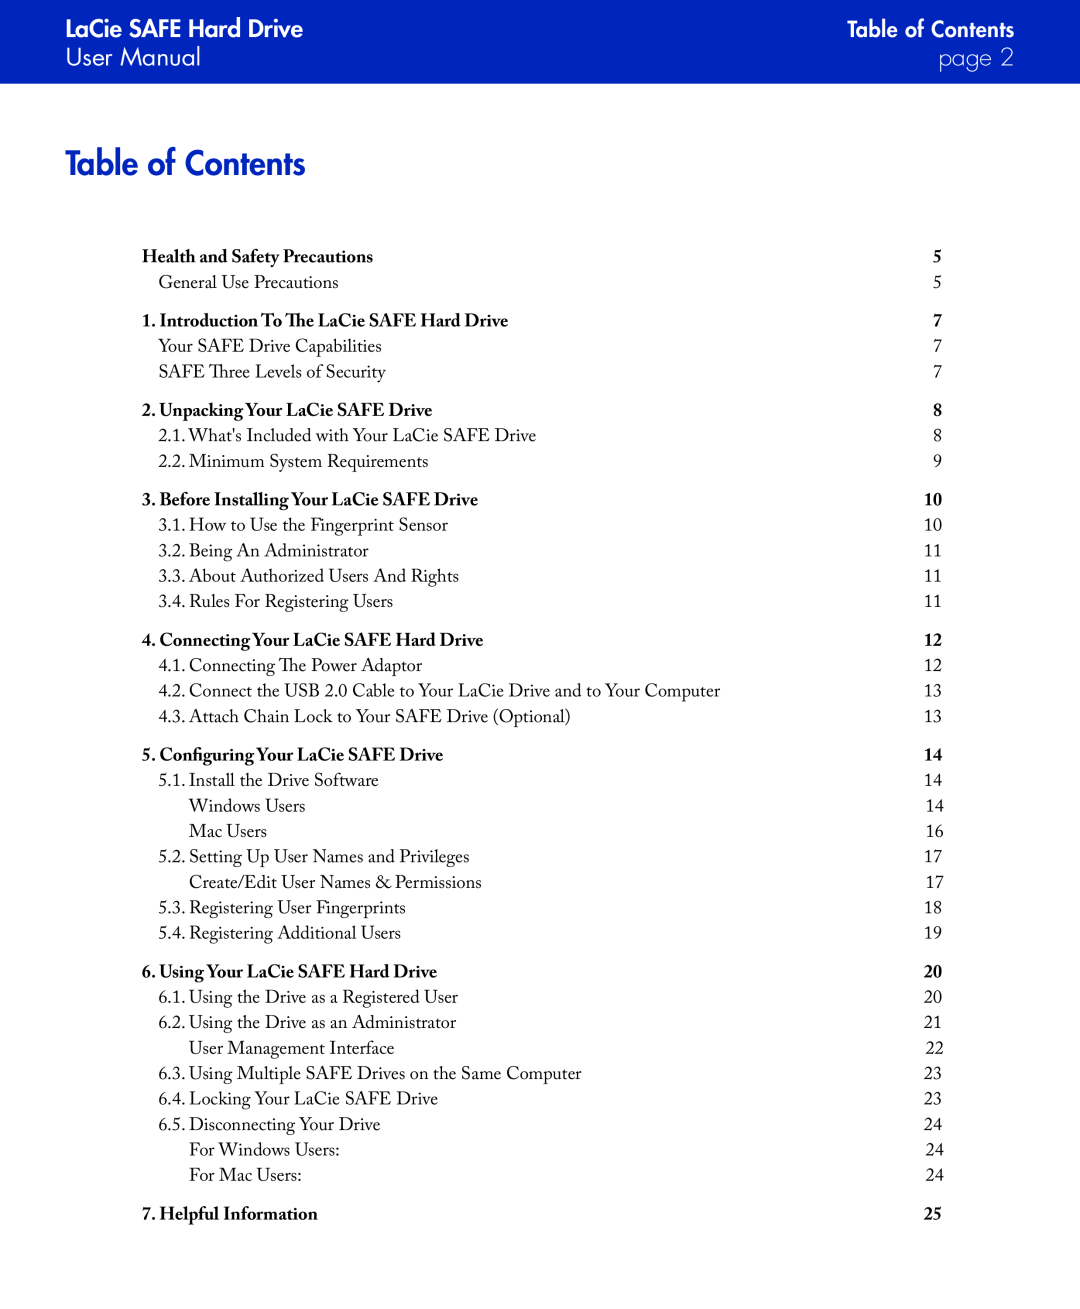 LaCie Table of Contents, LaCie SAFE Hard Drive, User Manual, page , Health and Safety Precautions, Helpful Information 